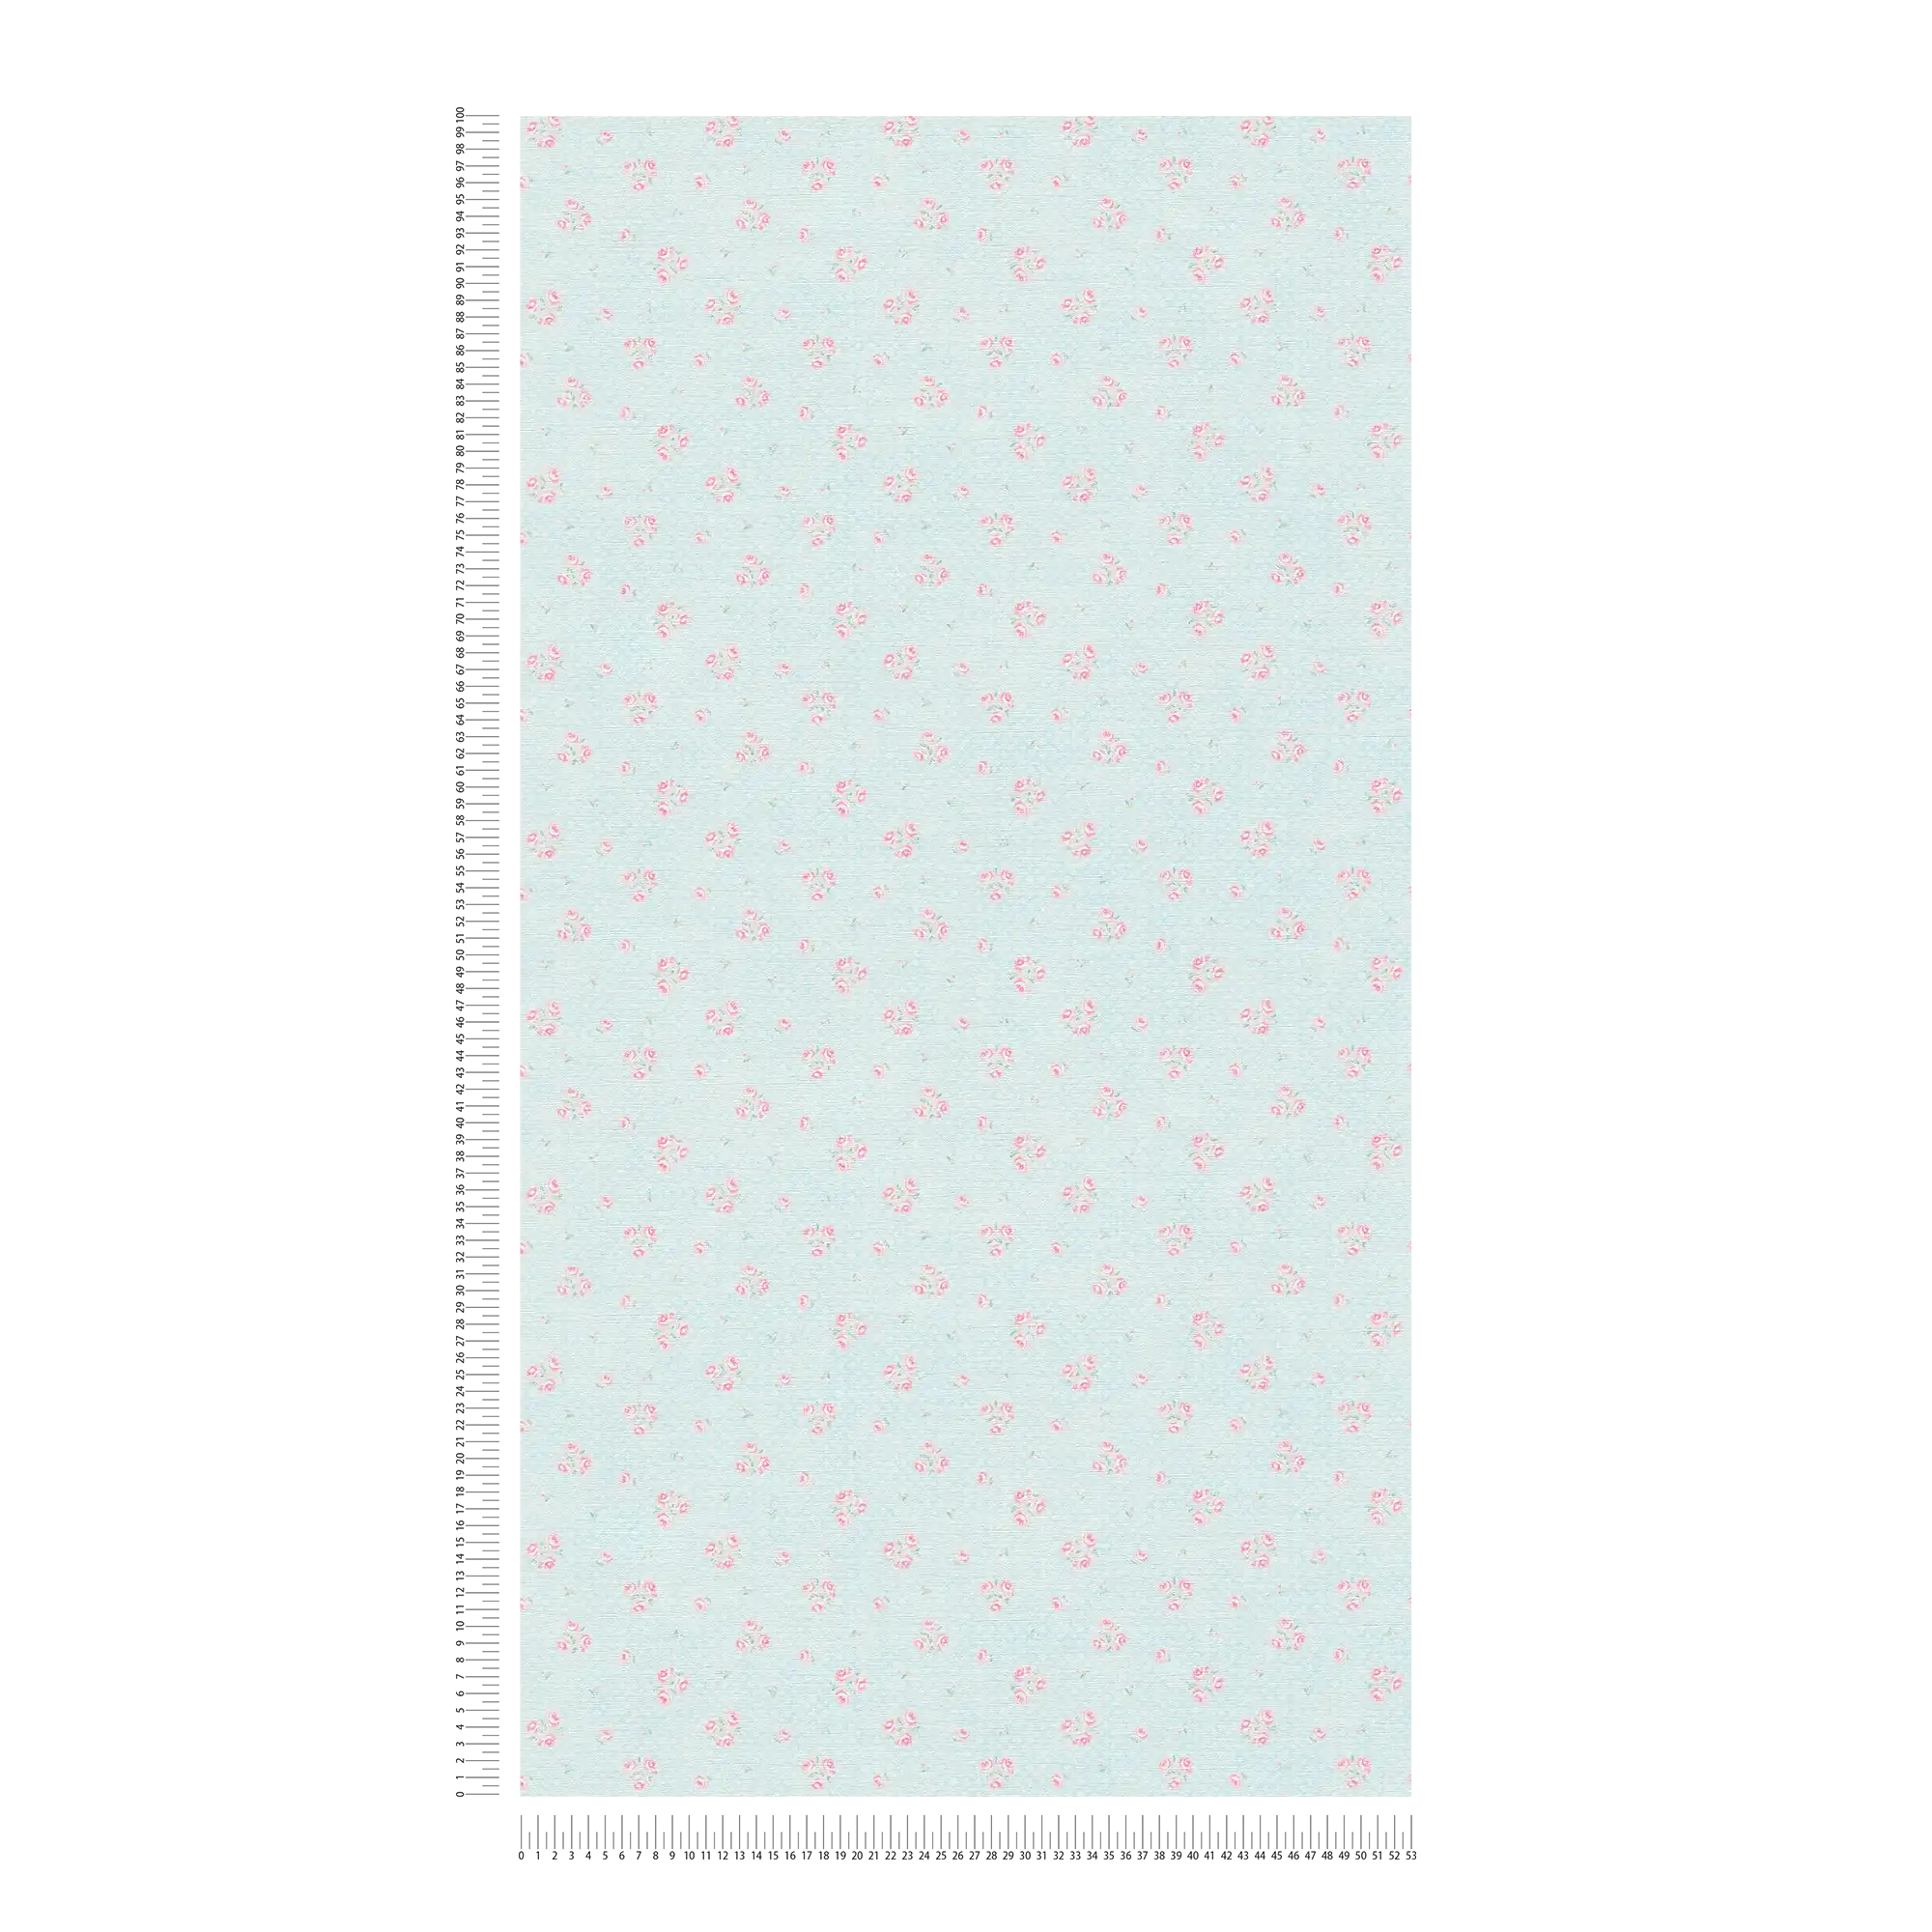             Shabby Chic style floral wallpaper - blue, pink, white
        